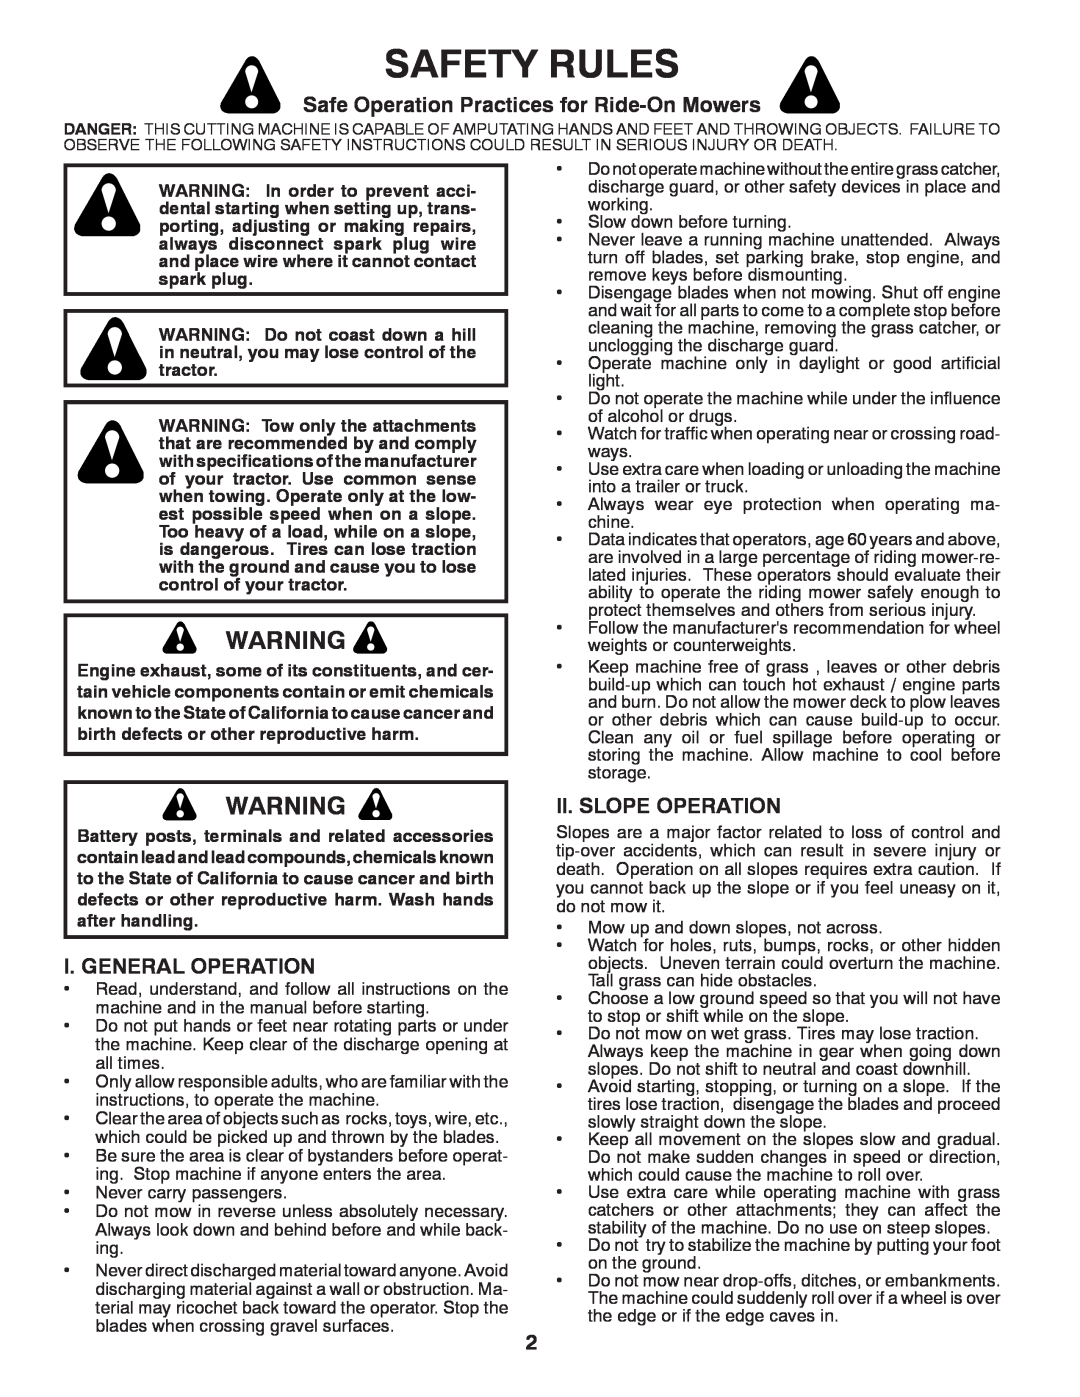 Poulan 96042007201 Safety Rules, Safe Operation Practices for Ride-On Mowers, I. General Operation, Ii. Slope Operation 